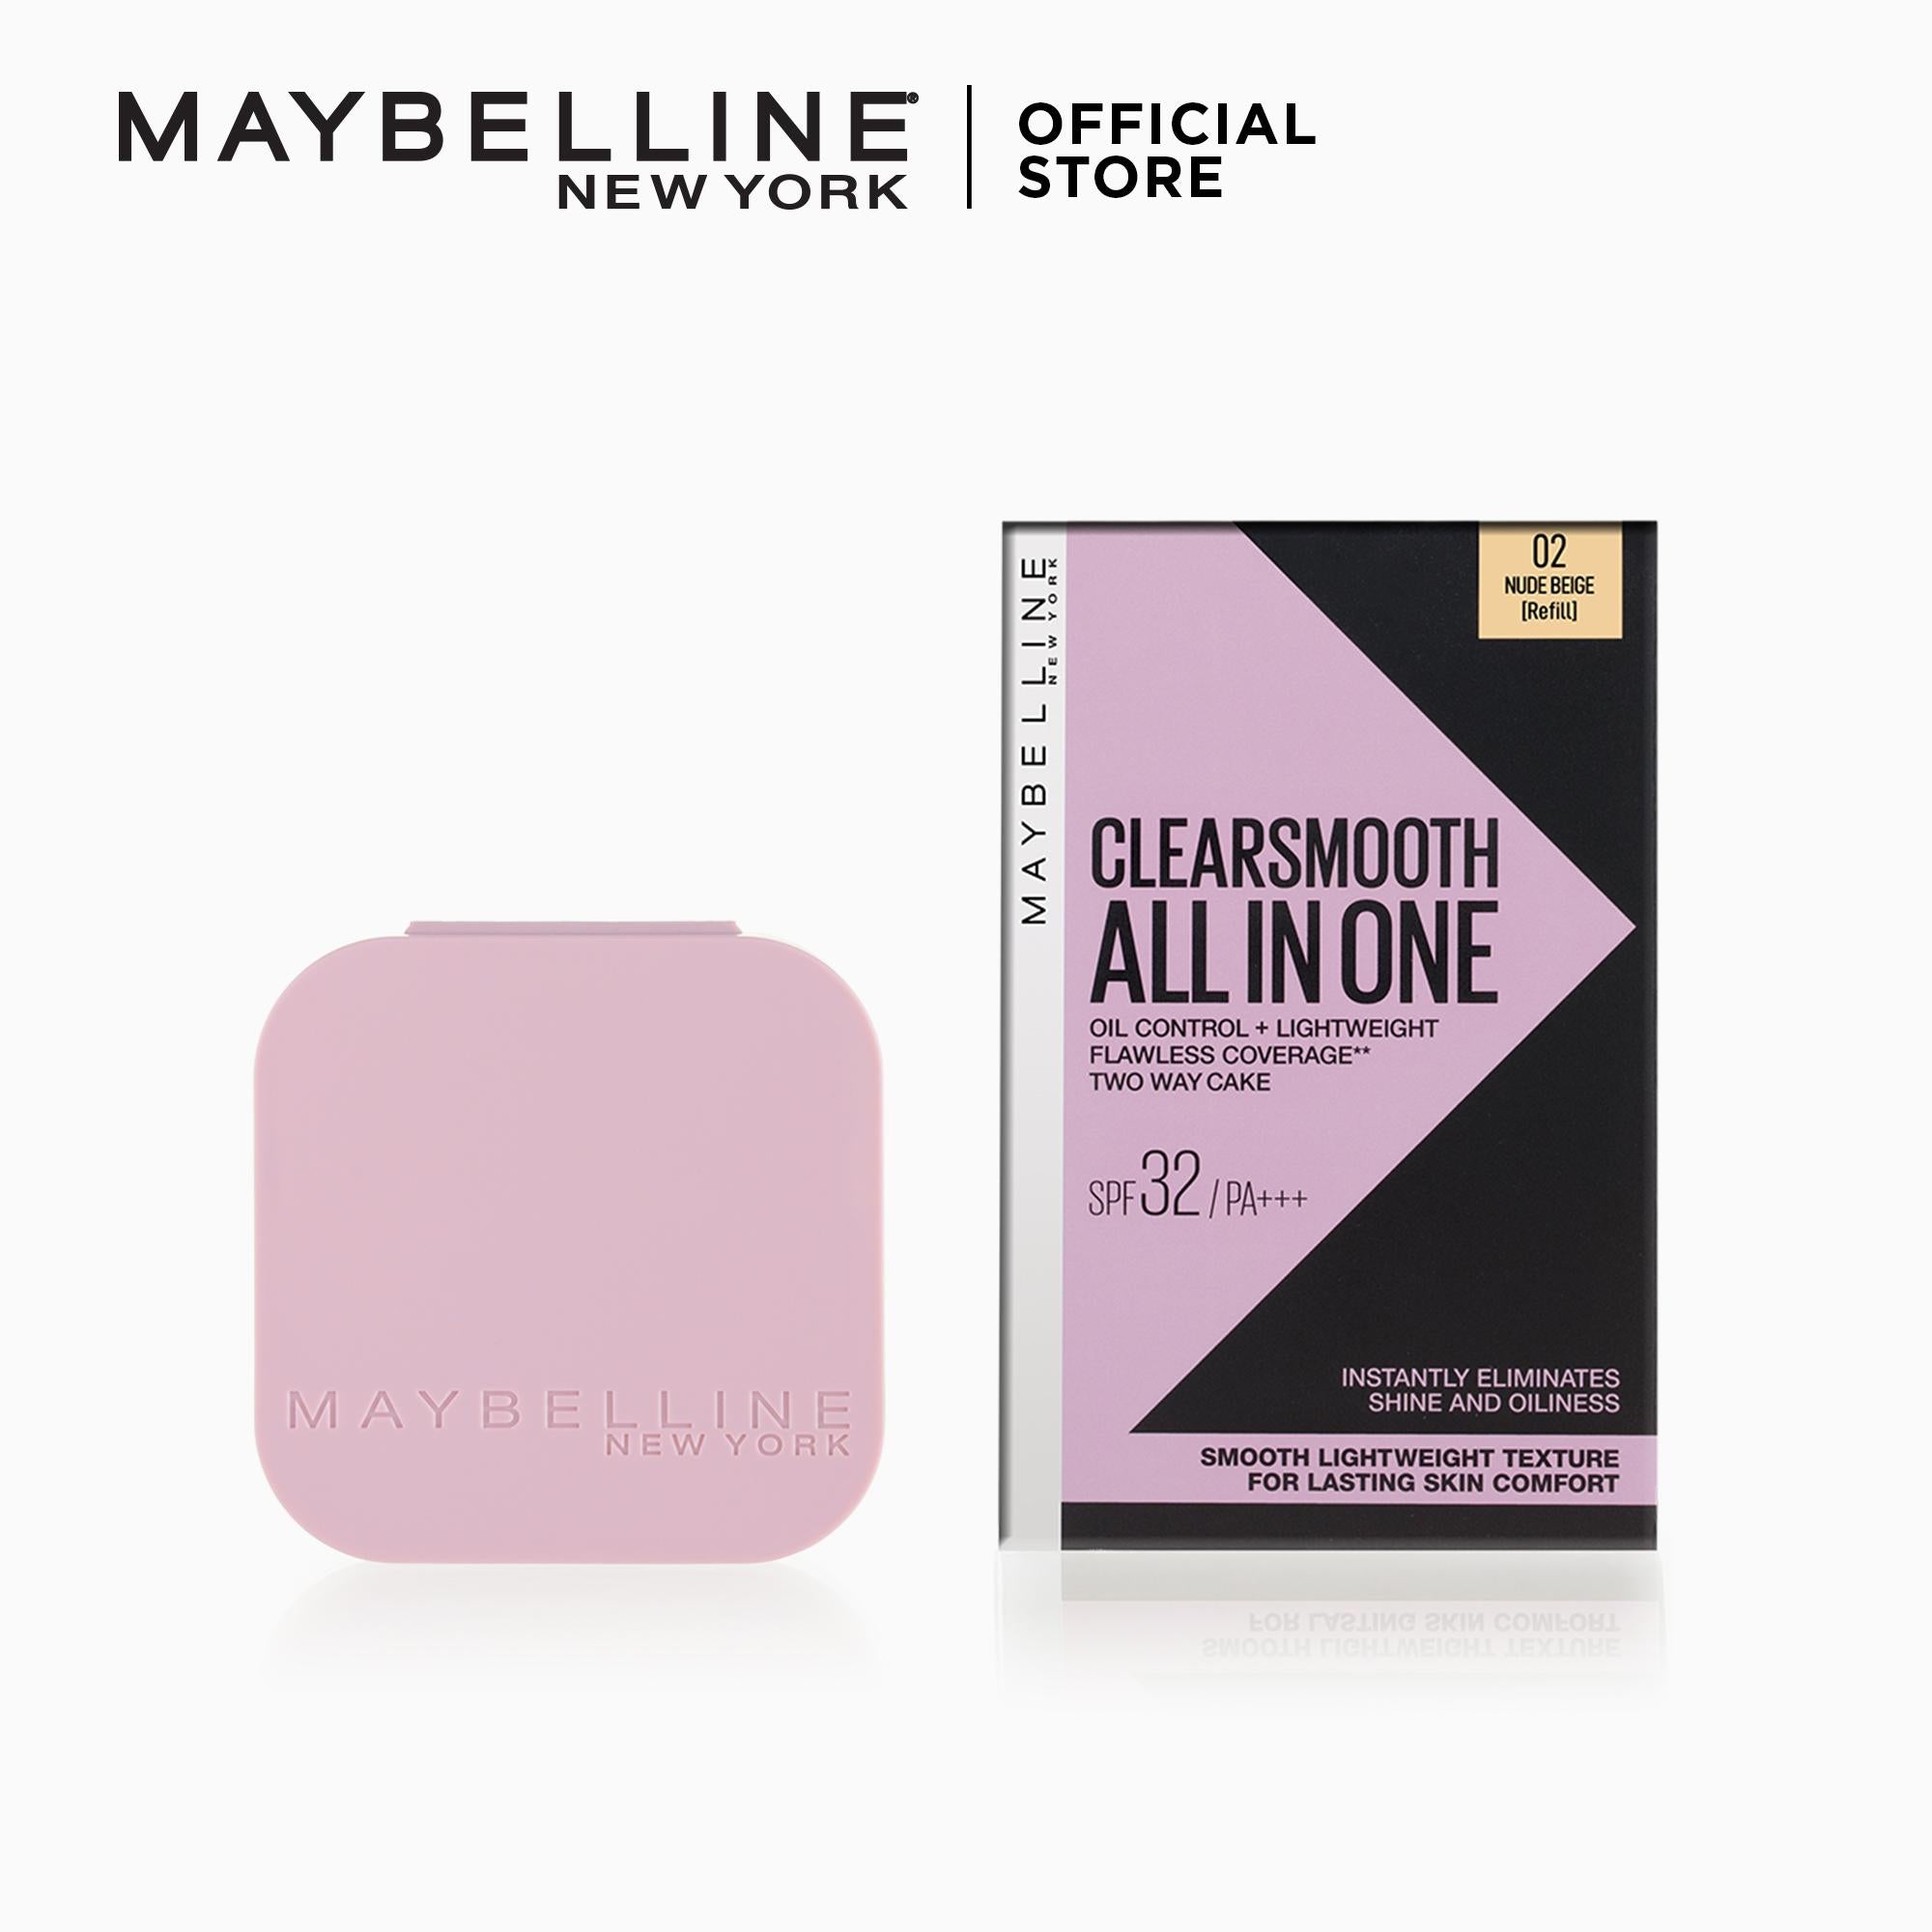 Maybelline New York Clear Smooth All In One Powder Foundation - 02 Nude Beige